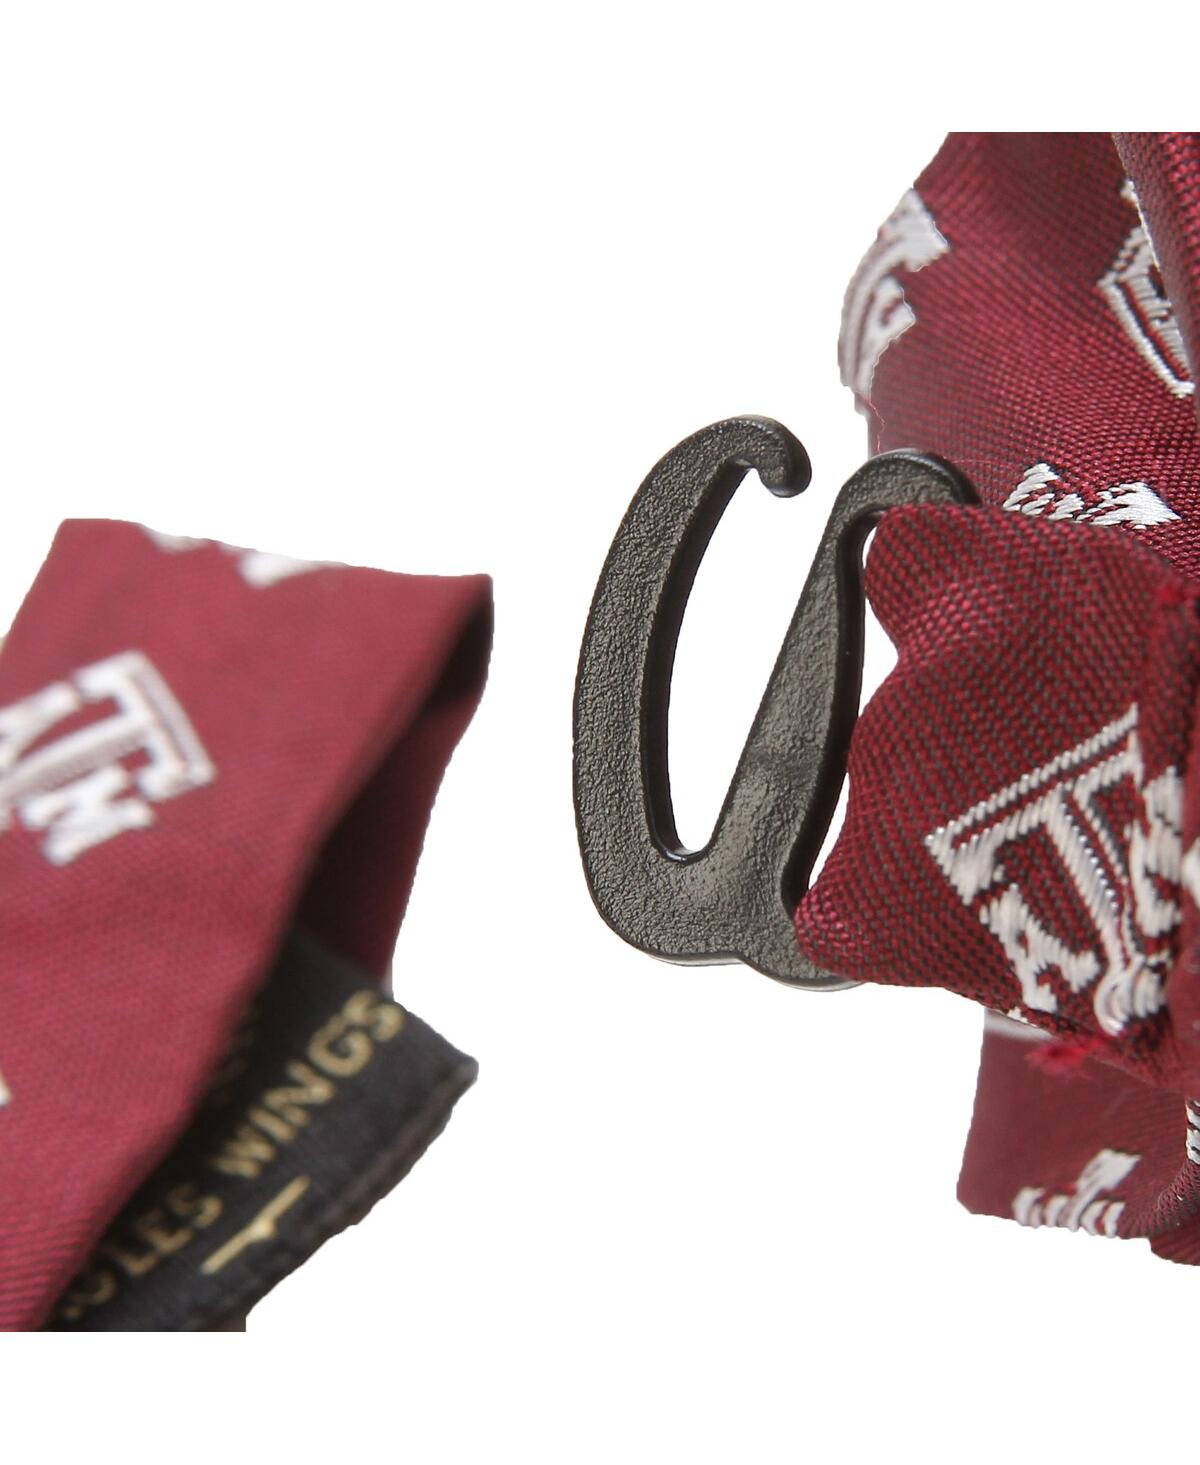 Shop Eagles Wings Men's Texas A&m Aggies Bow Tie In Burgundy